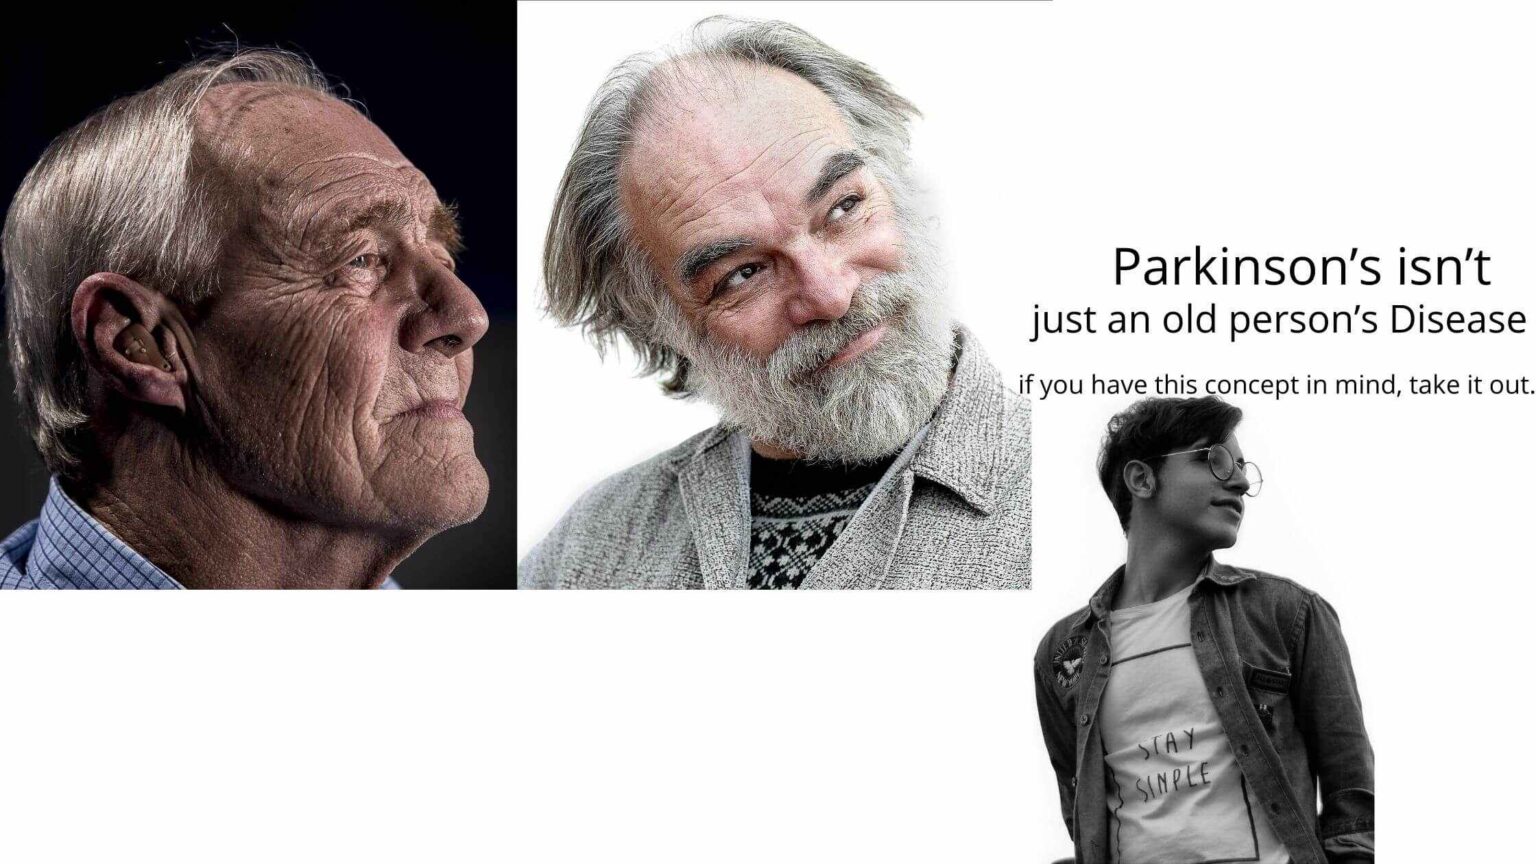 Parkinsons isnt just an old persons Disease